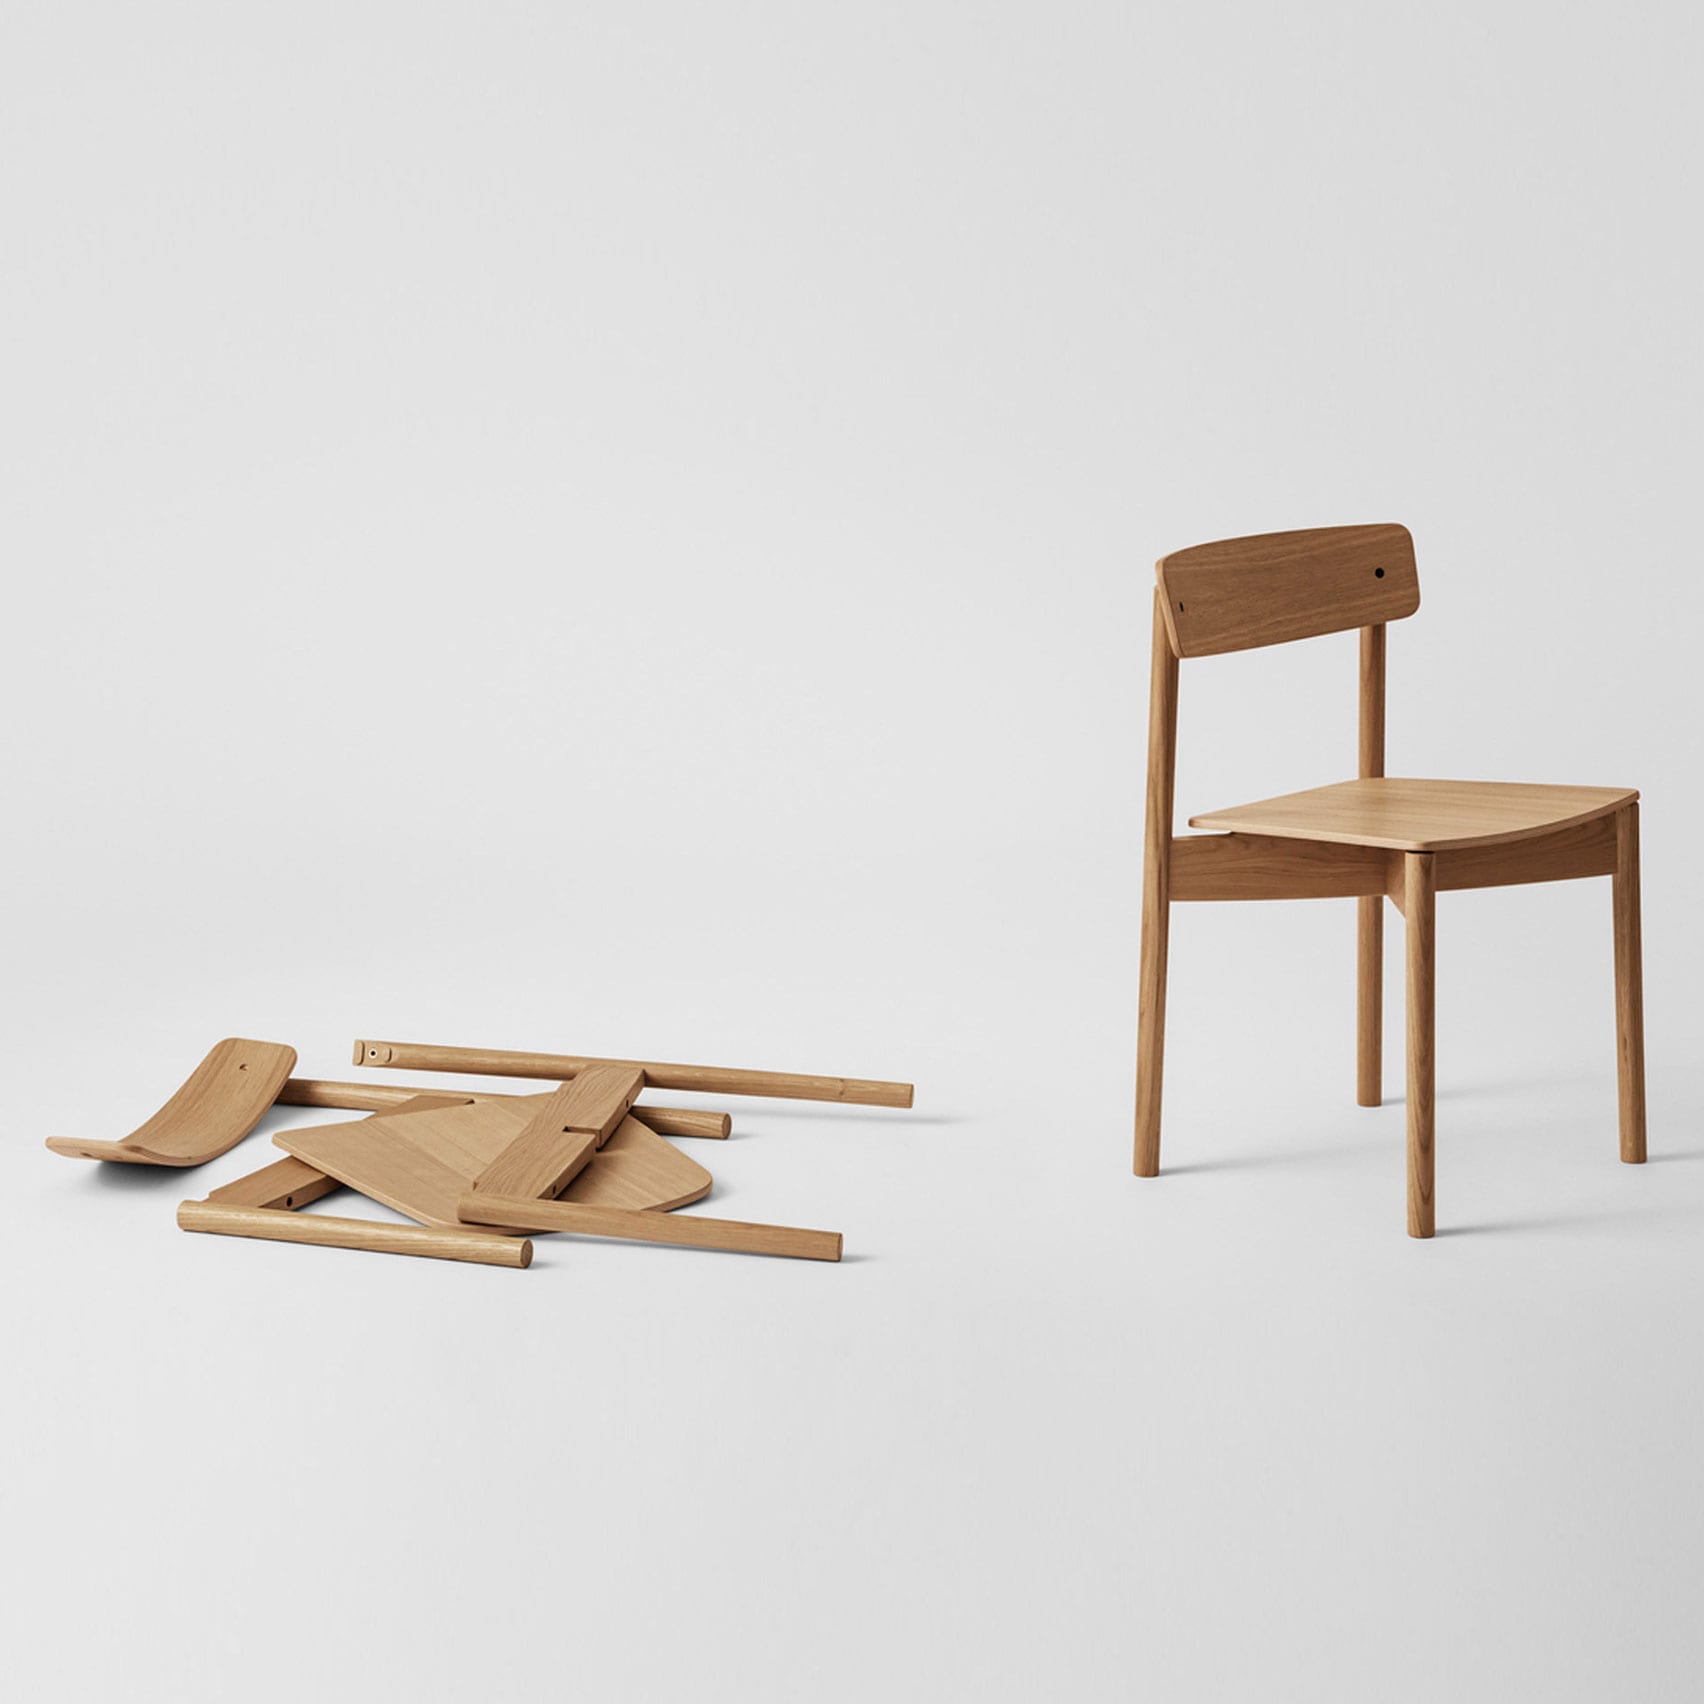 Cross Chair by Pearson Lloyd for Takt assembled and disassembled